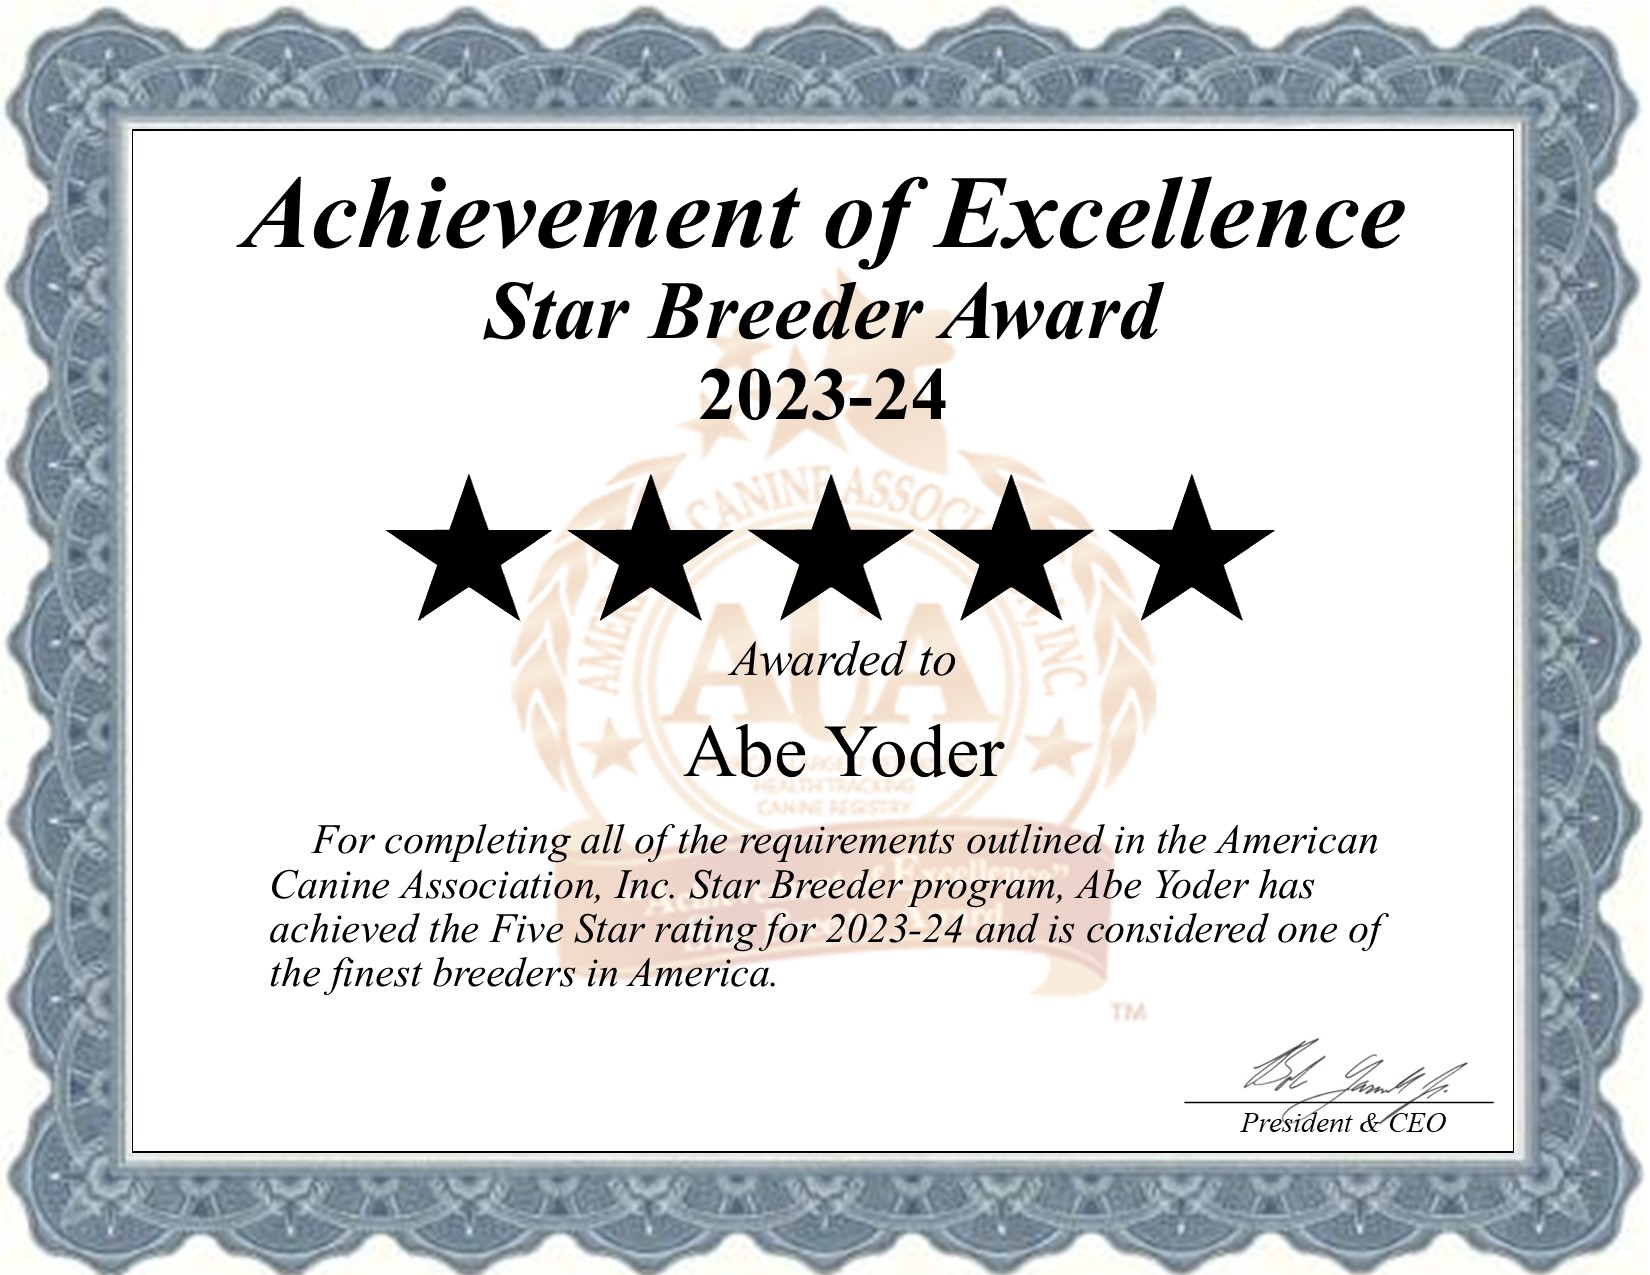 Abe, Yoder, dog, breeder, star, certificate, Abe-Yoder, Baltic, OH, ohio, puppy, dog, kennels, mill, puppymill, usda, 5-star, aca, ica, registered, Poodle, none